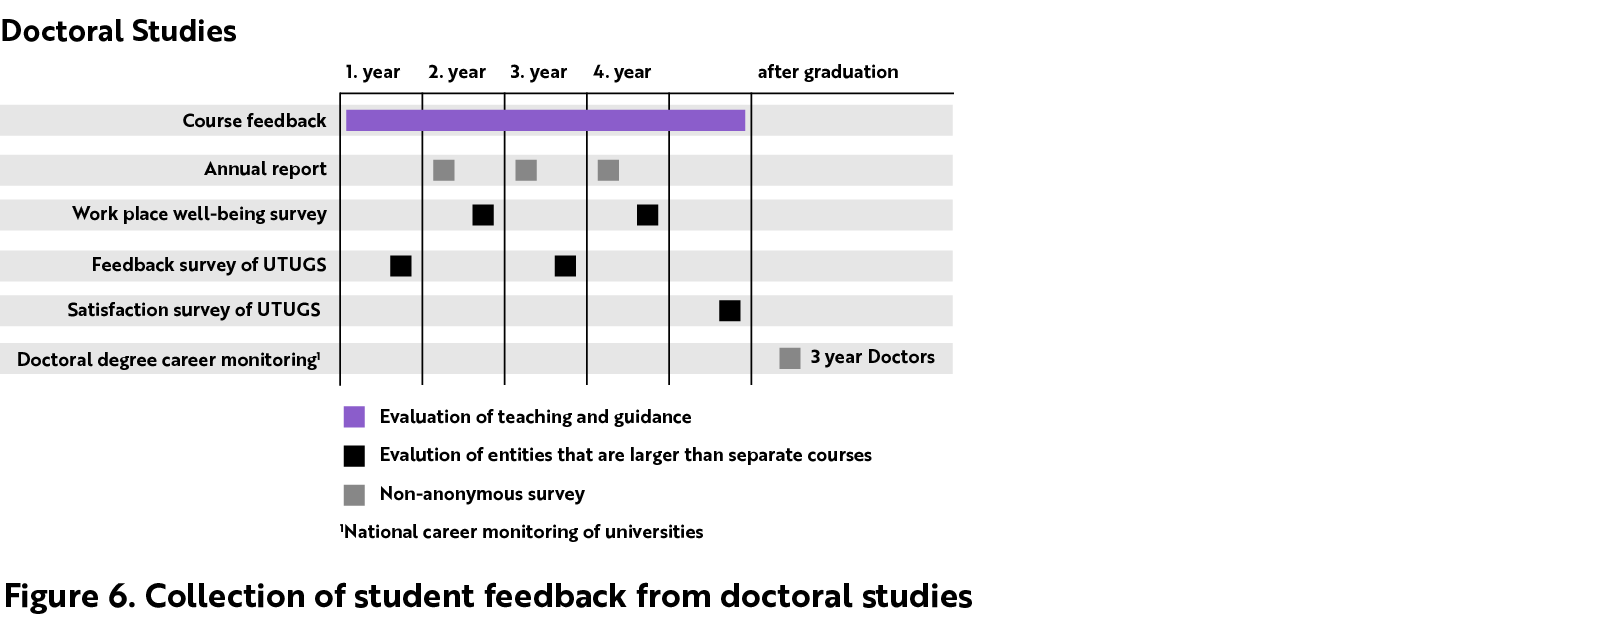 Doctoral studies feedback is collected through course feedback, the annual report, work place well-being surveys, feedback surveys of UTUGS, satisfaction survey of UTUGS and doctoral degree career monitoring. Course feedback is collected throughout the years and it is an evaluation of teaching and guidance. Annual report is a non-anonymous survey which is carried out in the second, third and fourth year. Work place well-being survey is carried out in the third and fourth year. Feedback survey of UTUGS is carried out in the first and third year. Satisfaction survey of UTUGS is carried out after the fourth year. Doctoral degree career monitoring is a non-anonymous survey which is collected 3 years after graduation. Doctoral degree career monitoring belongs to the national career monitoring of the universities.